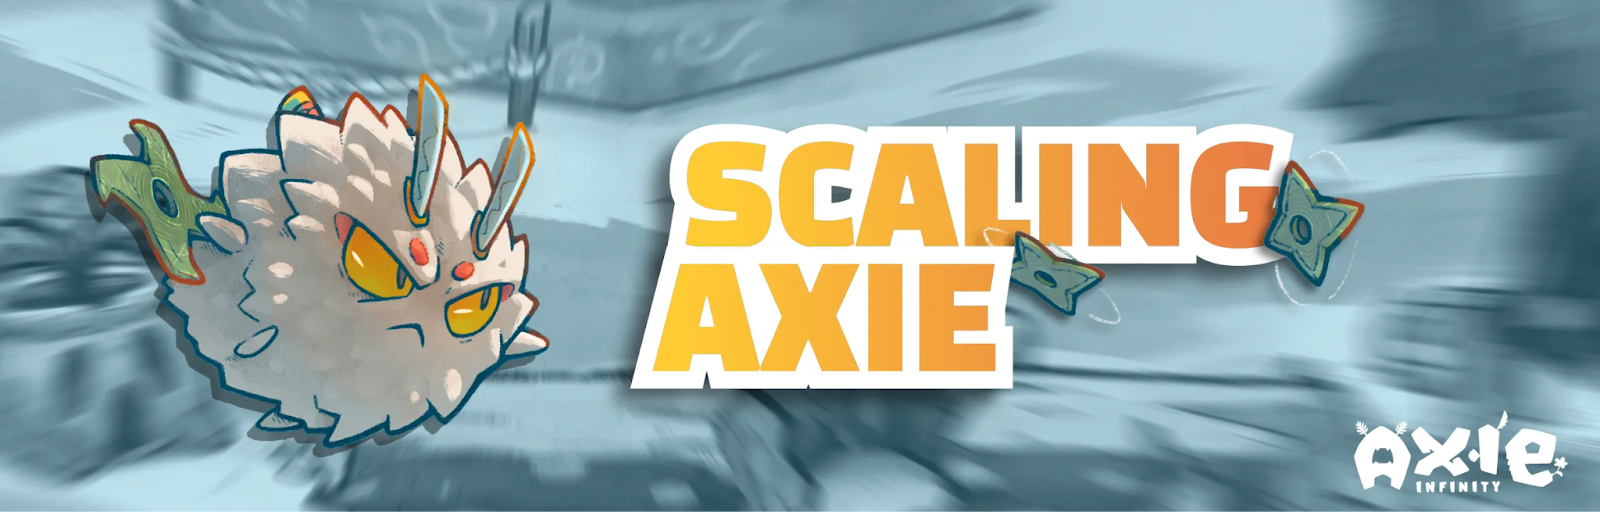 Scaling Axie Infinity